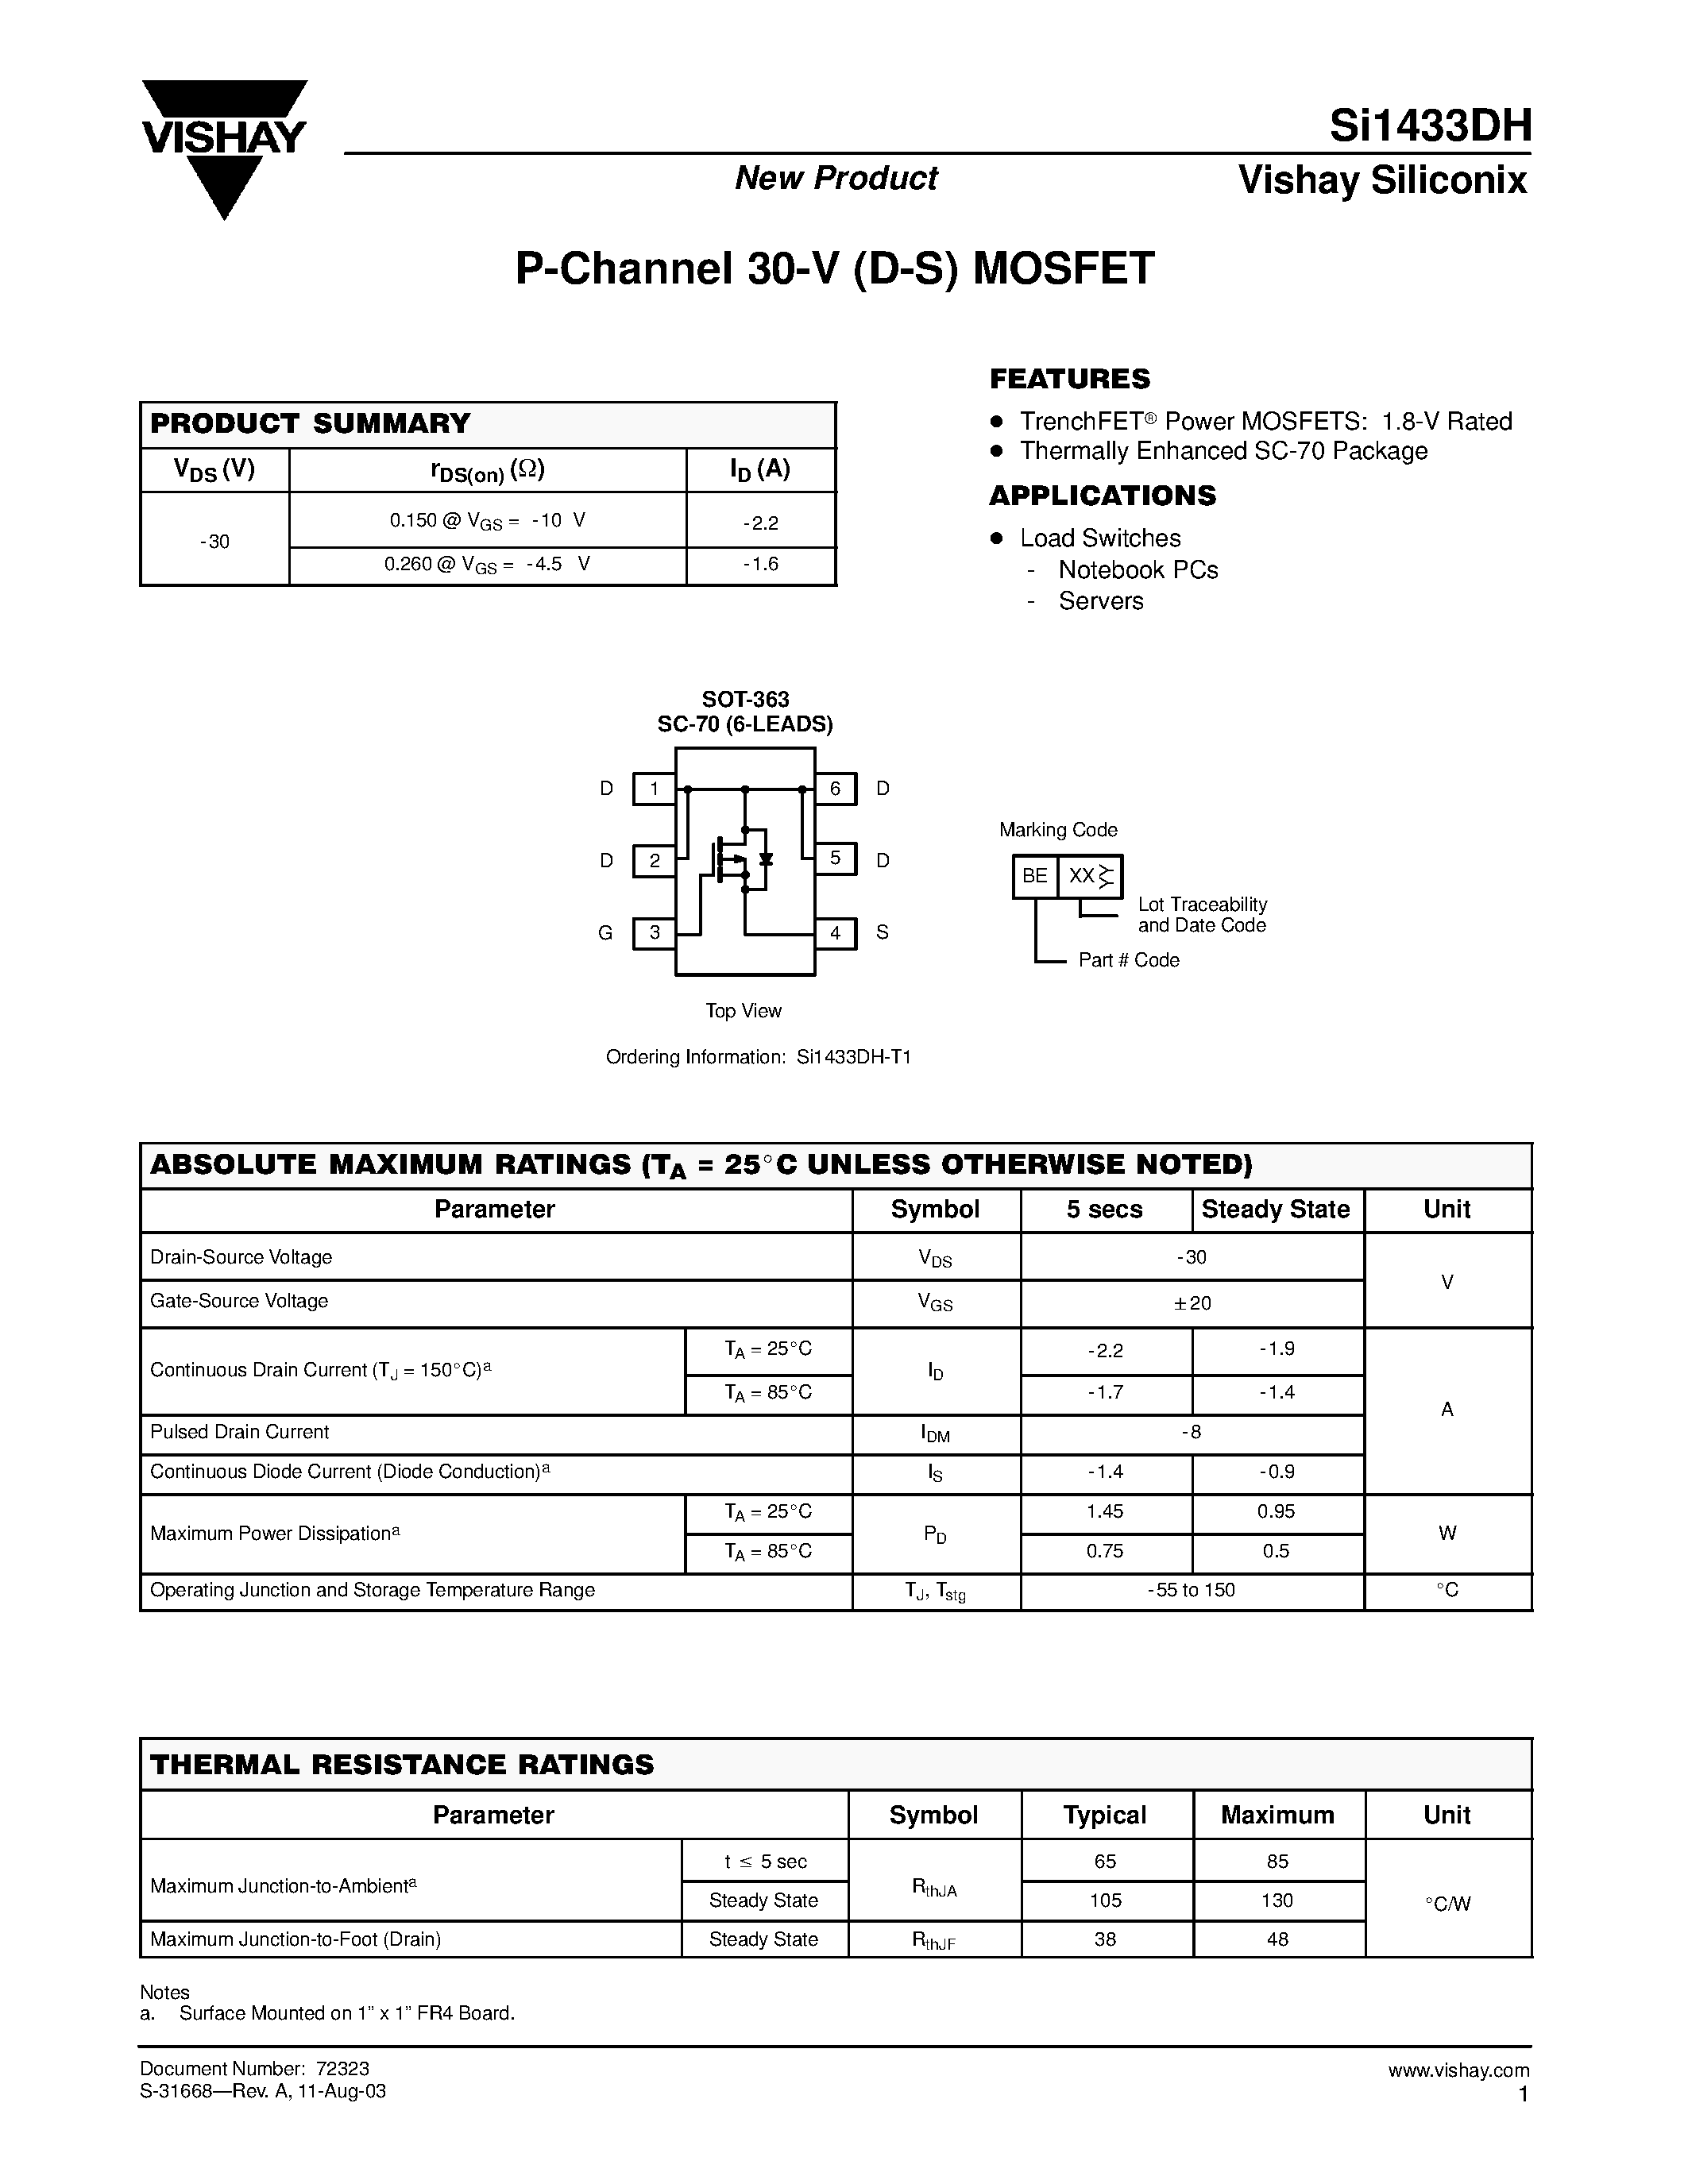 Datasheet SI1433DH - P-Channel 30-V (D-S) MOSFET page 1